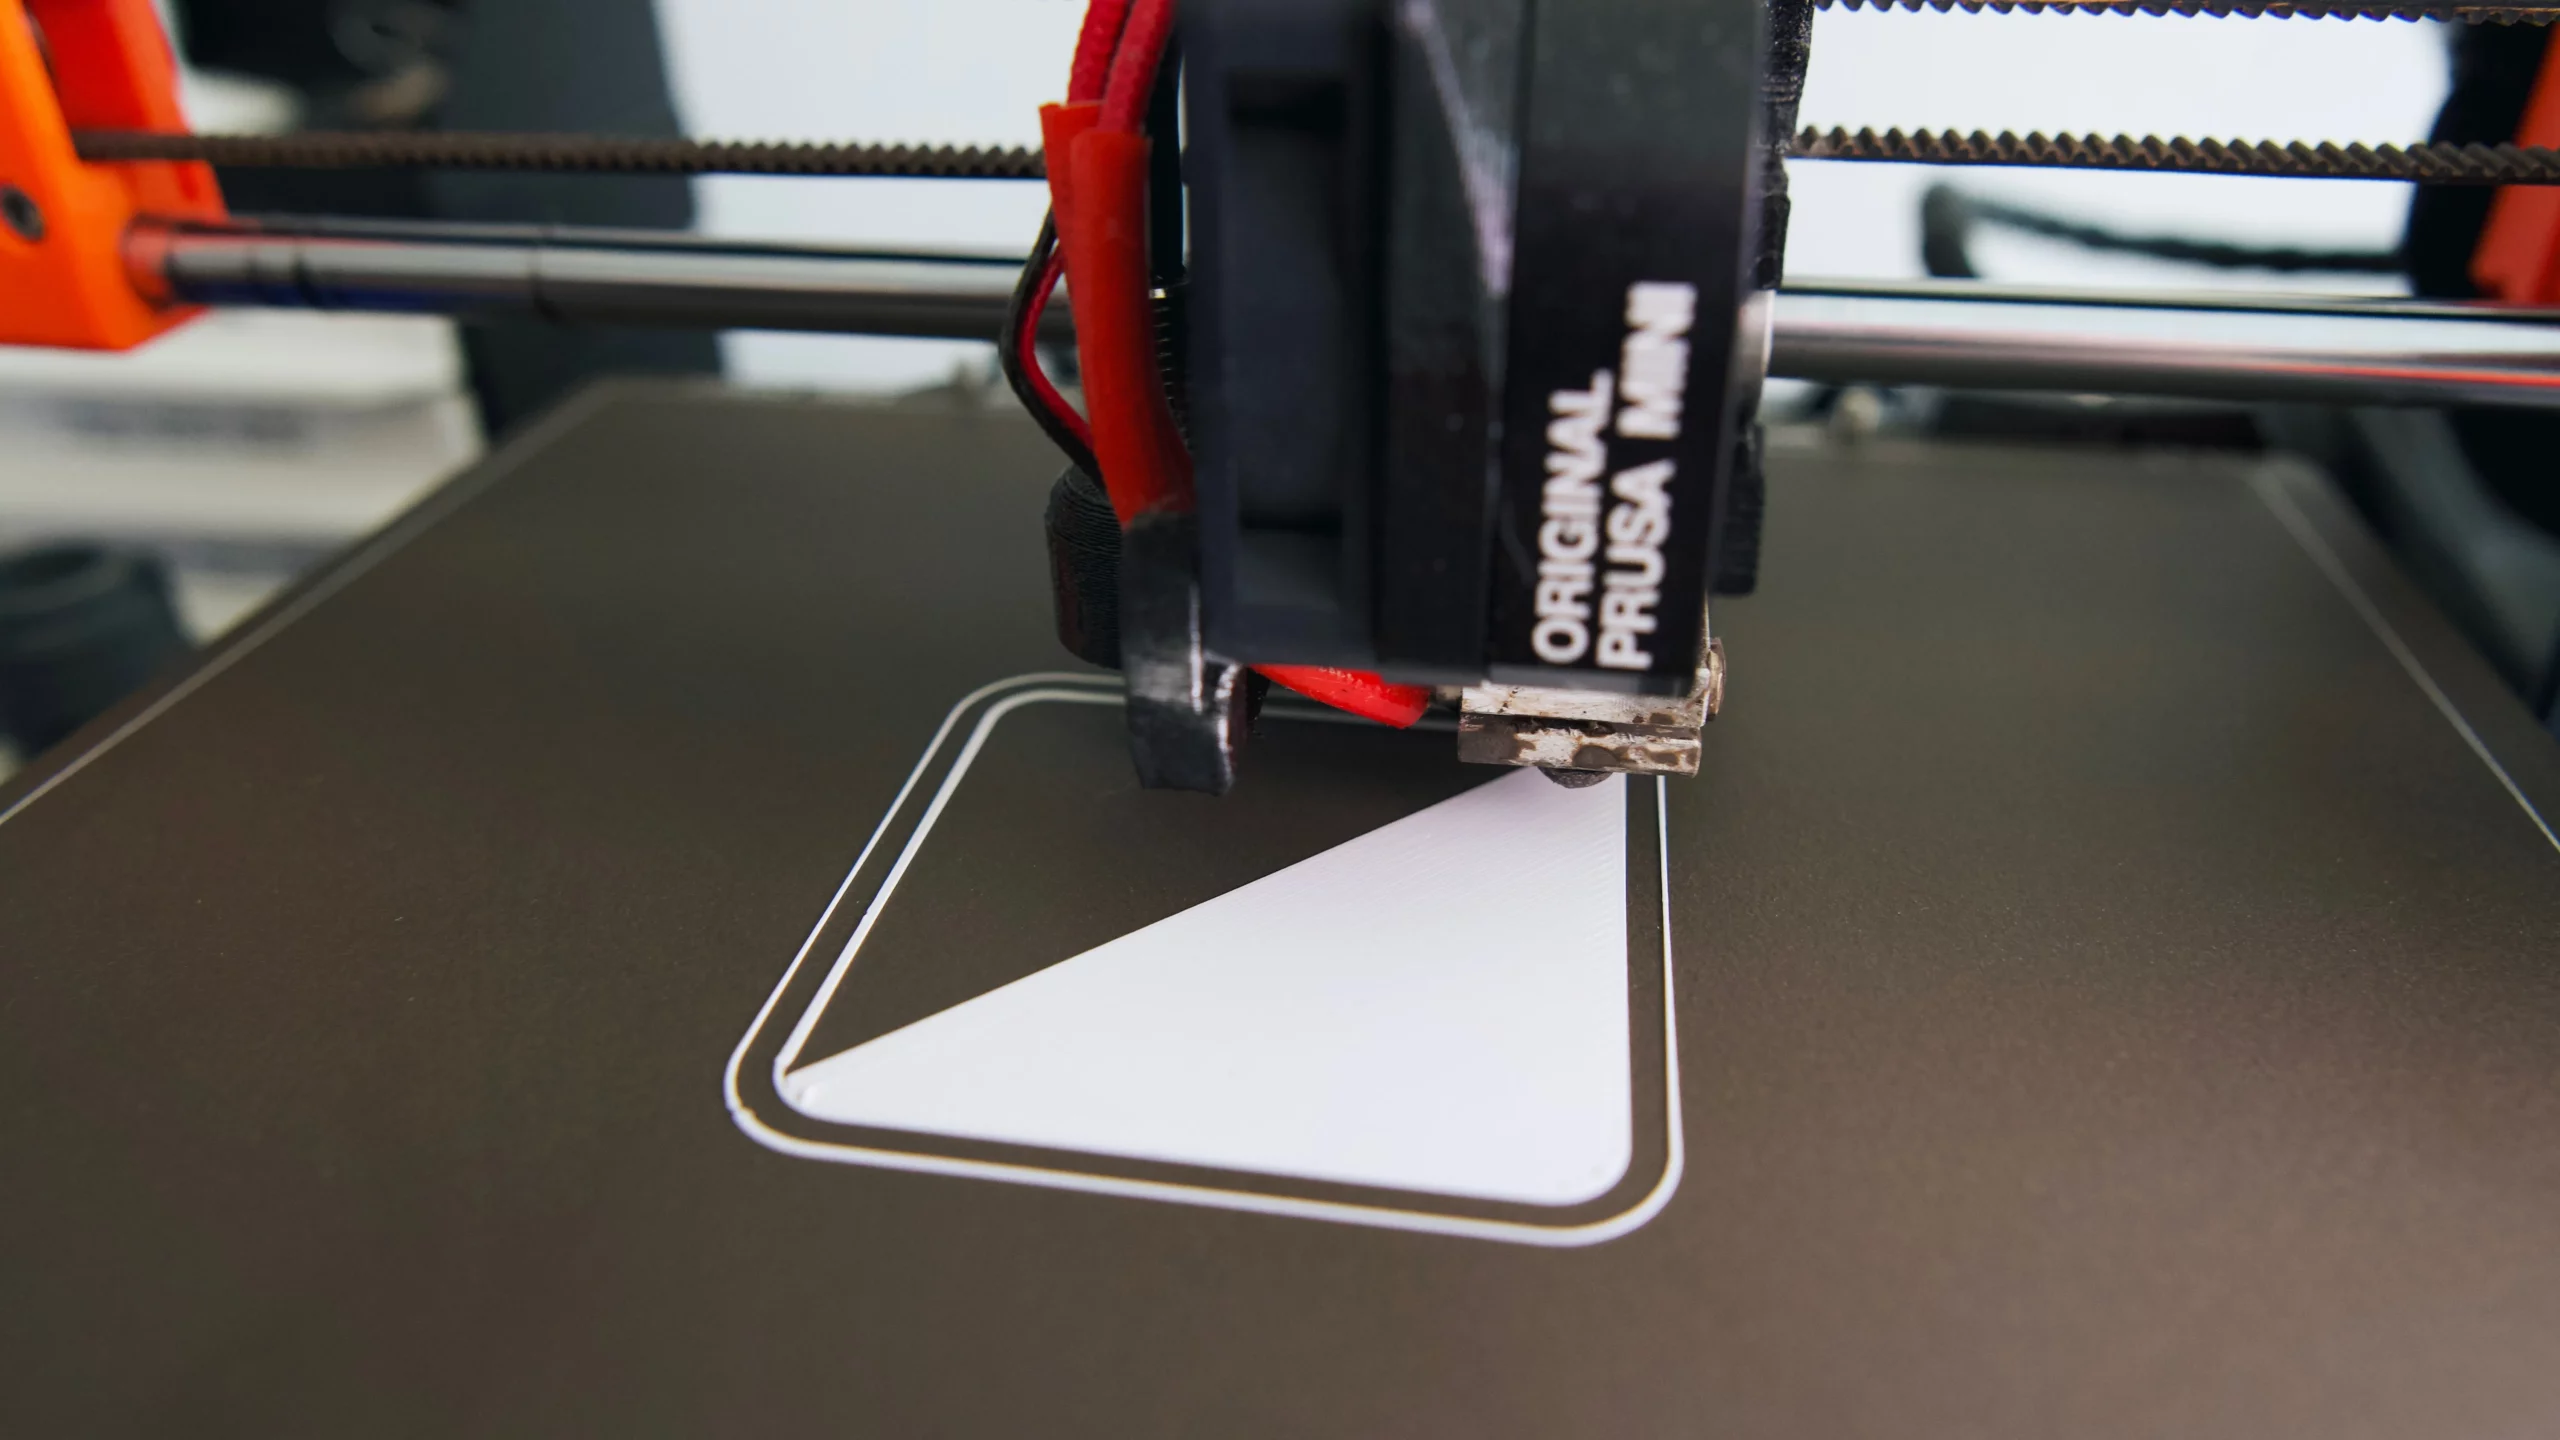 3D Printing: the First Layer